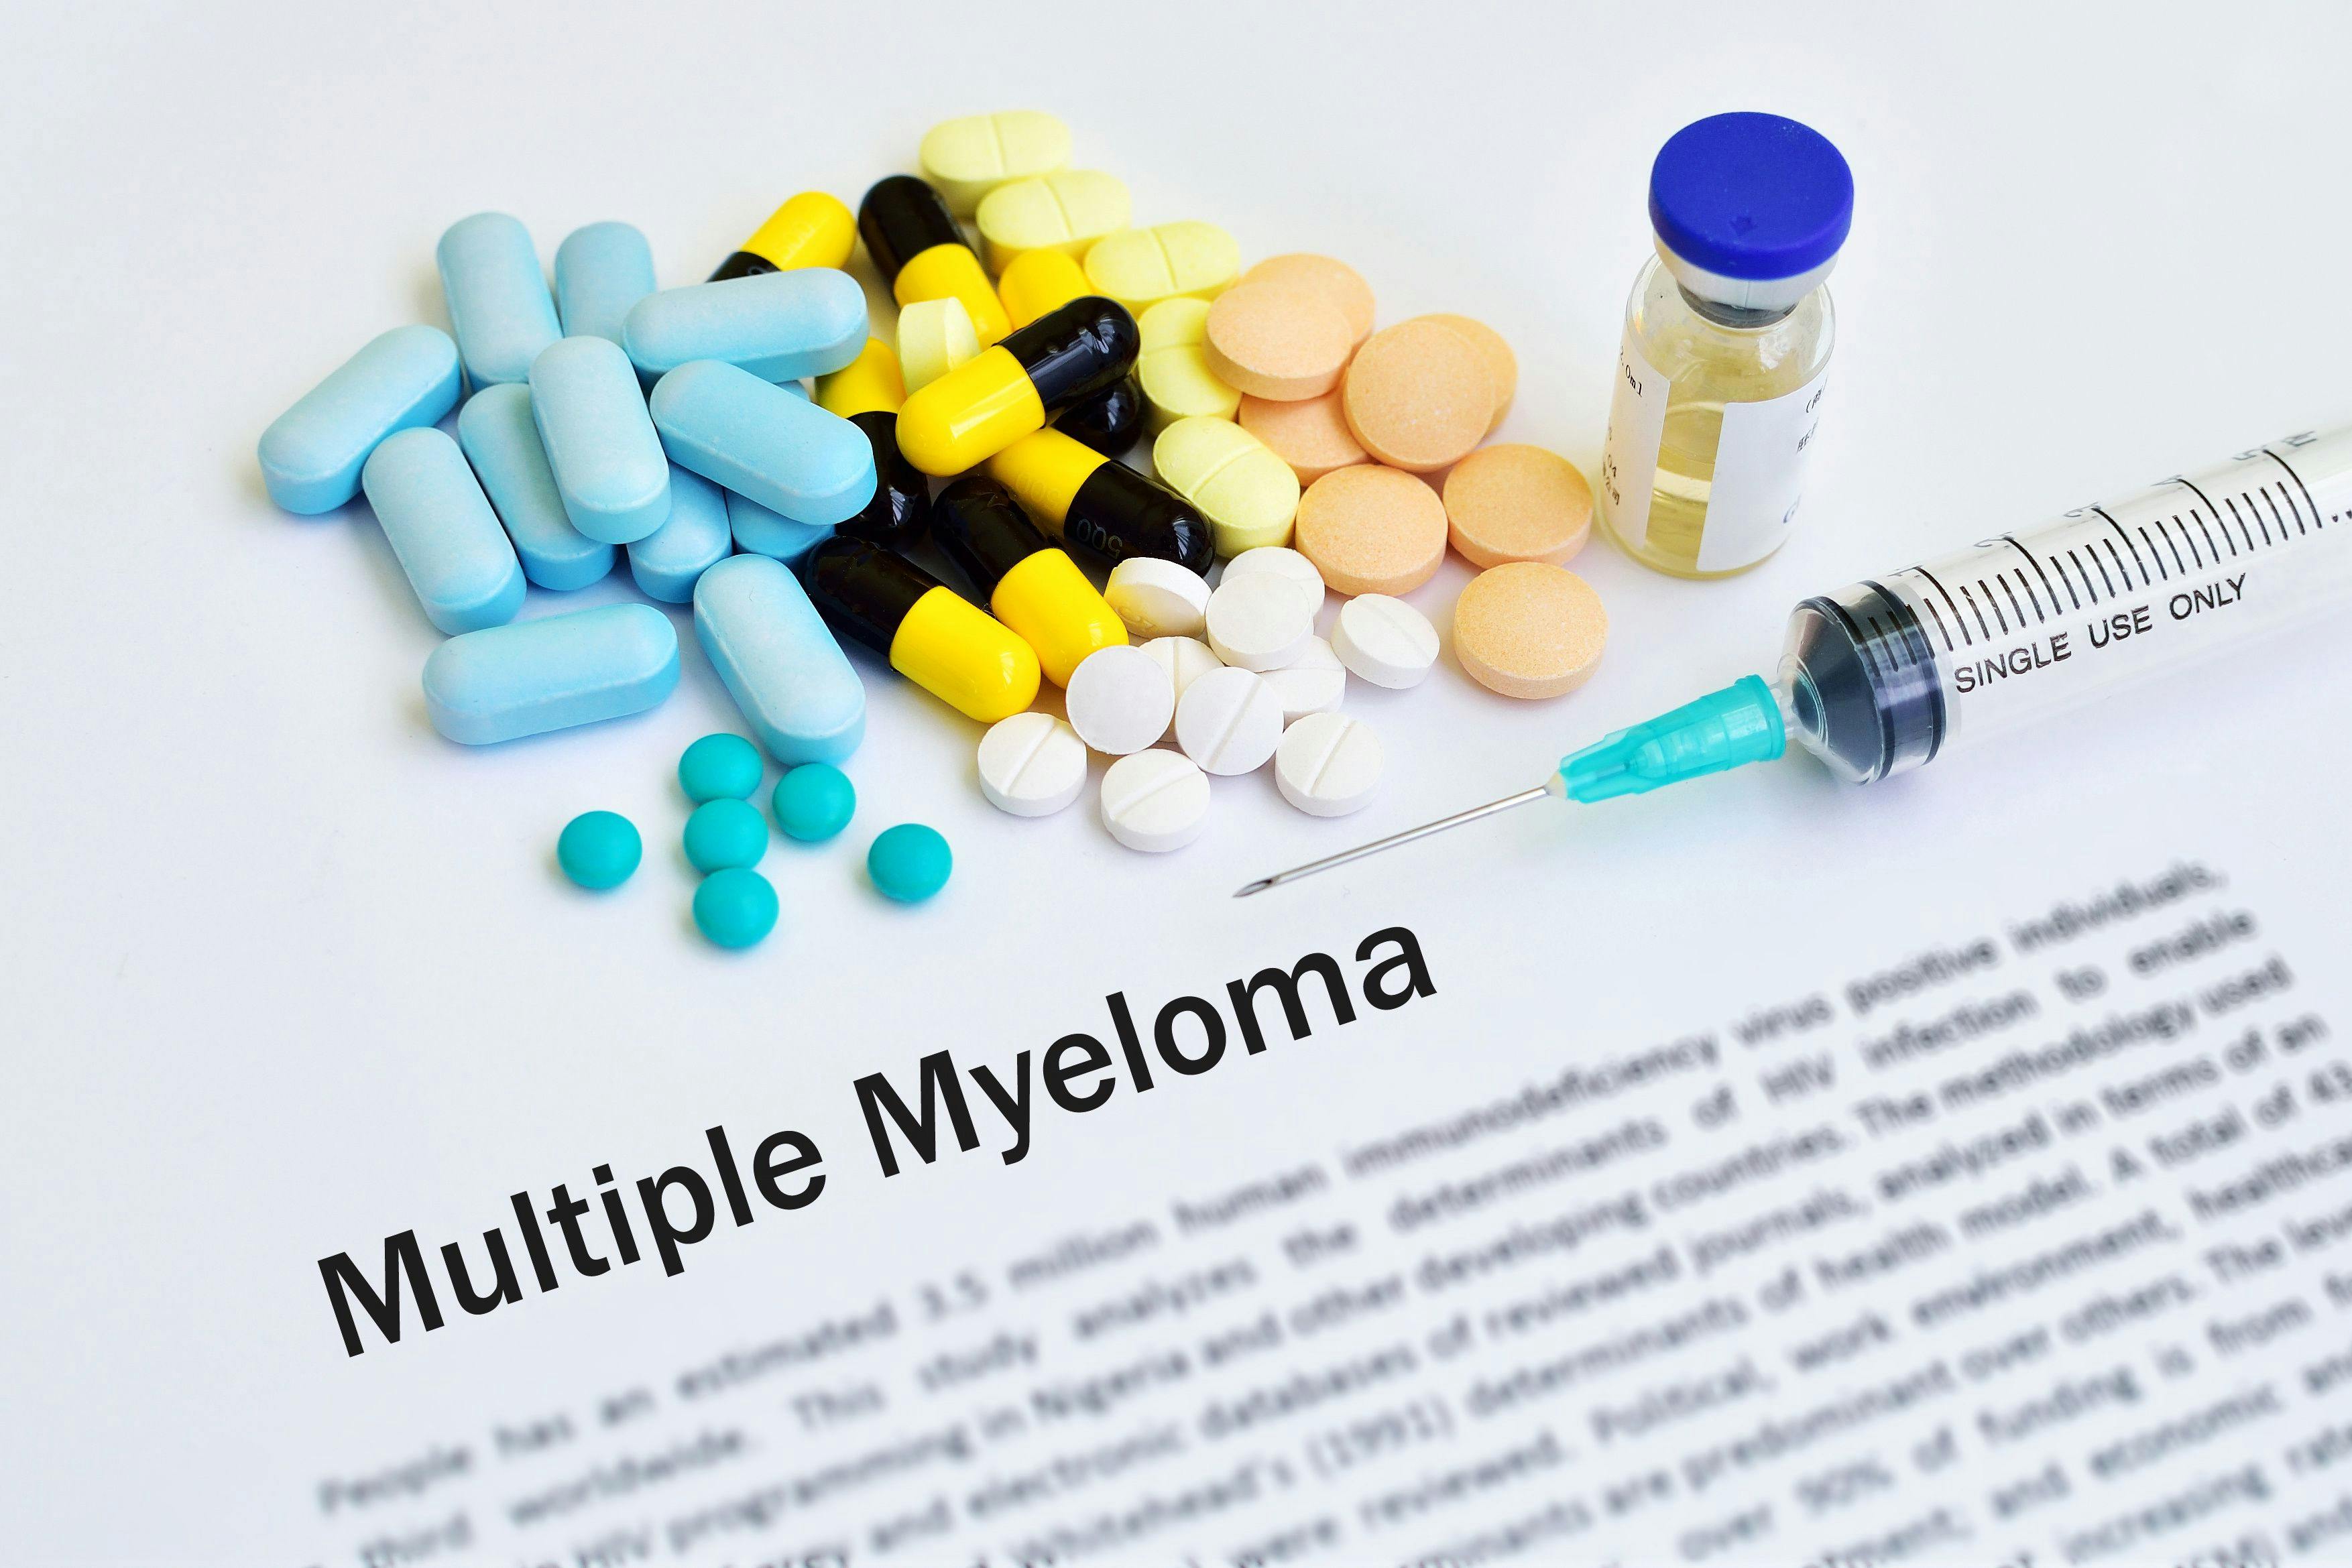 FDA Approves New Carfilzomib Combination Regimen for Treatment of Relapsed or Refractory Multiple Myeloma